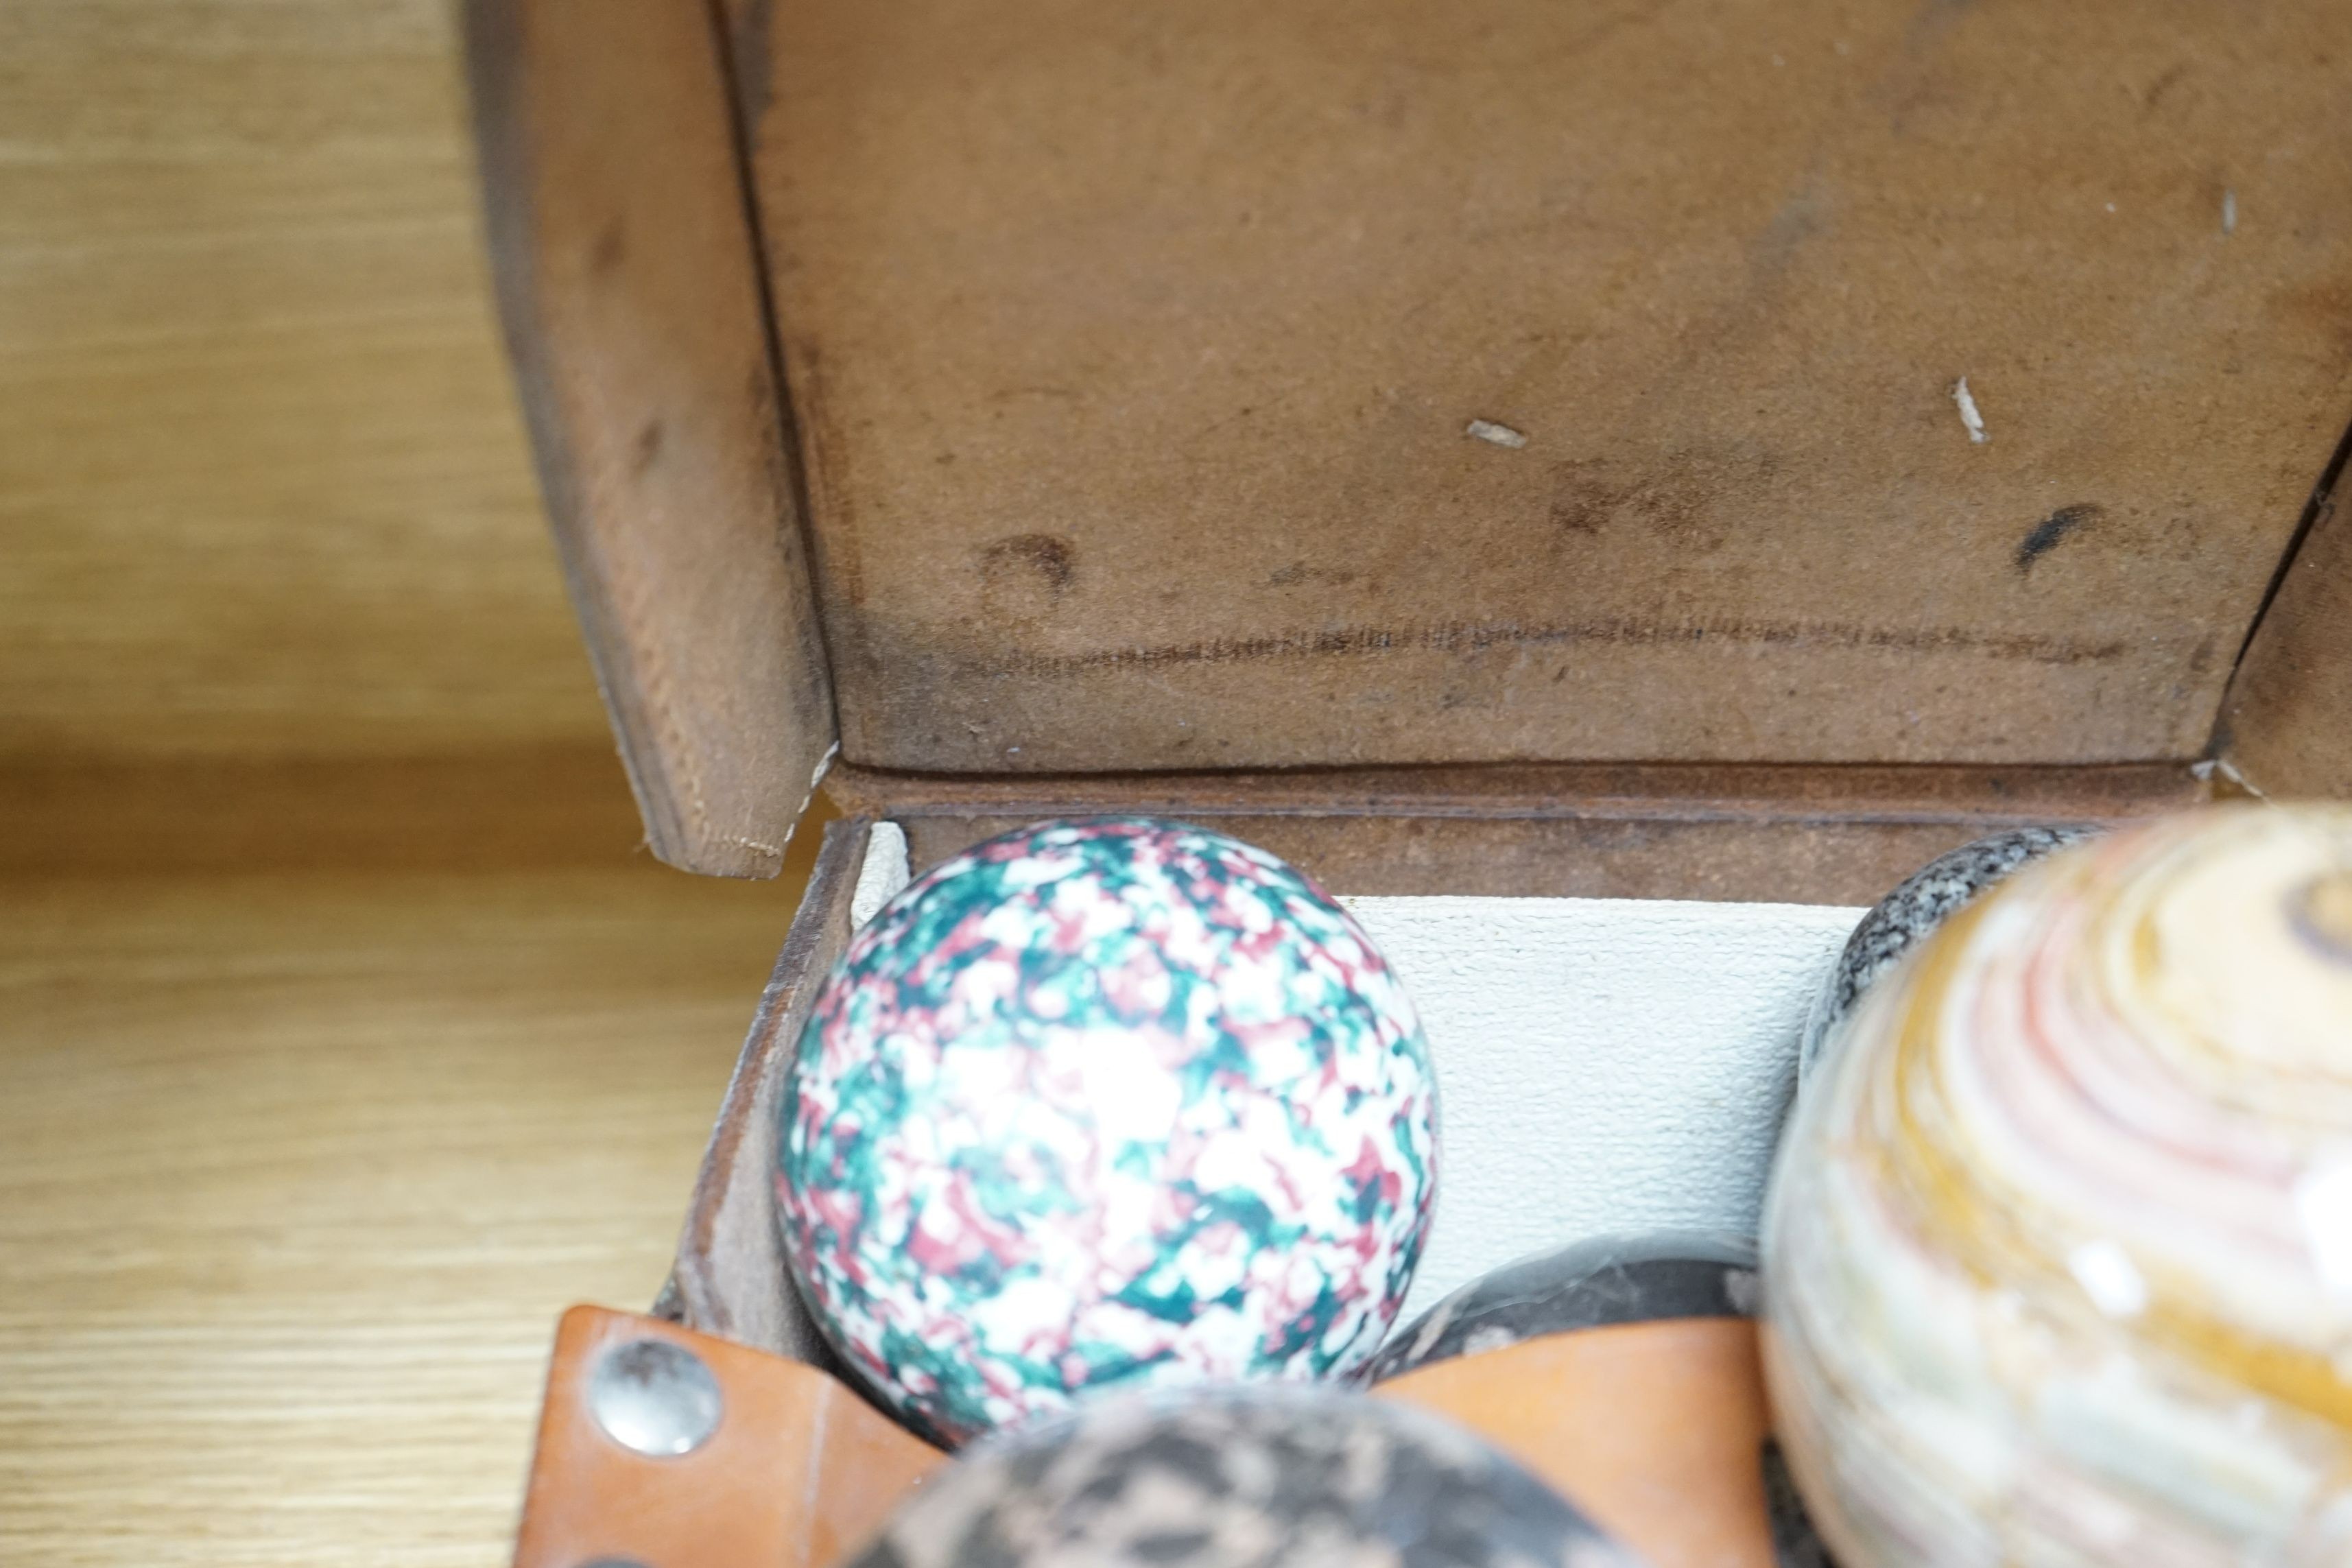 A collection of polished semi-precious stone eggs and balls